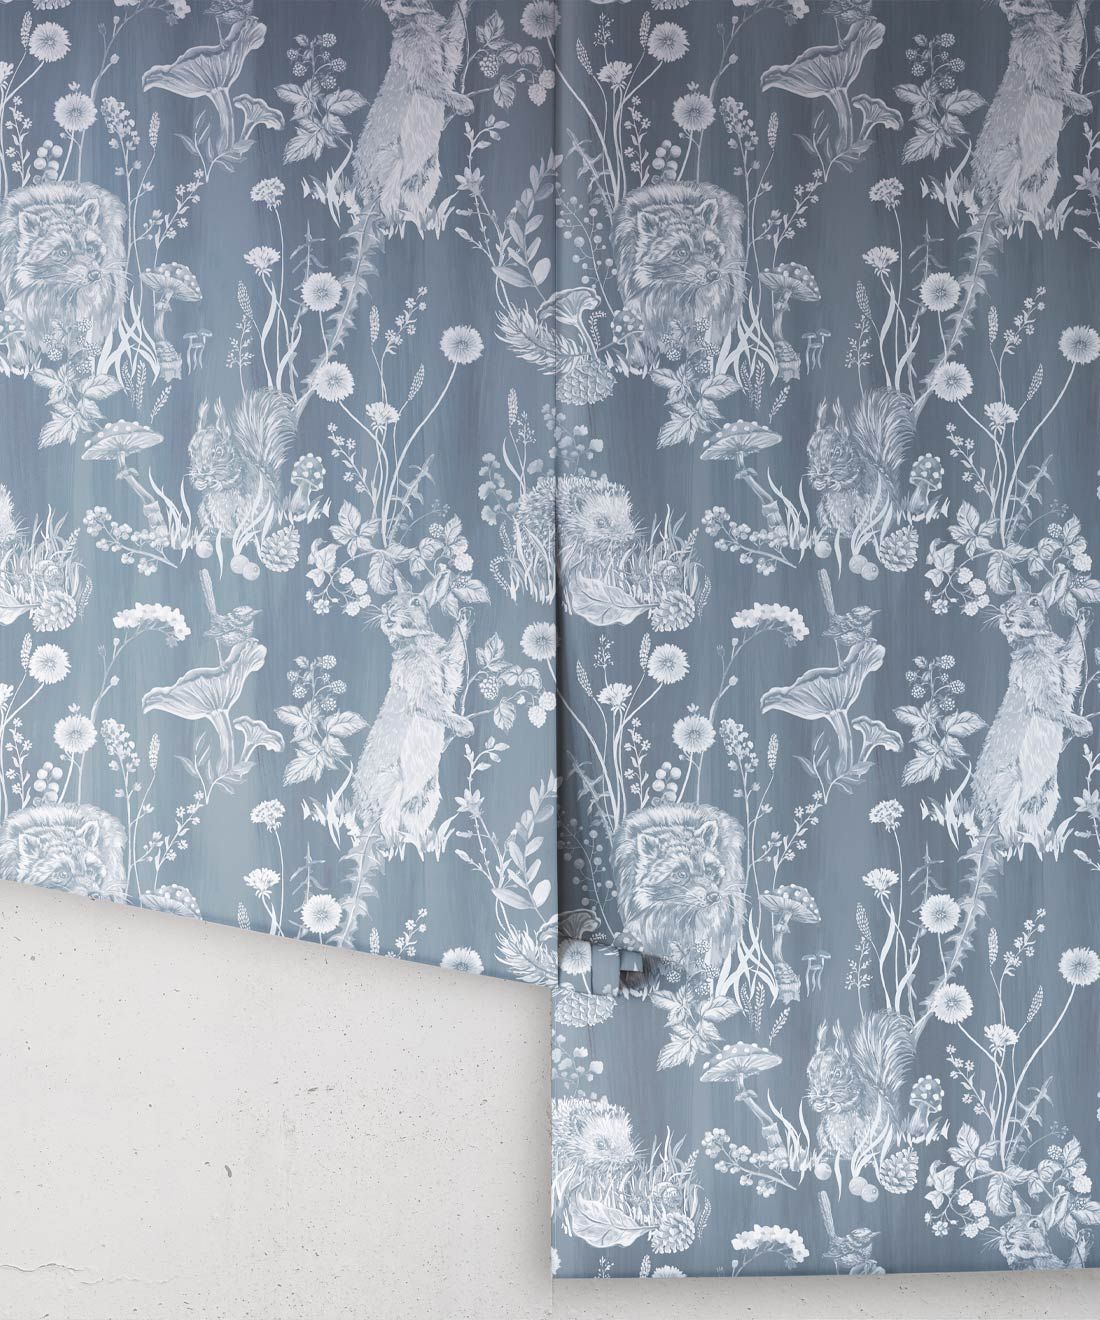 Woodland Friends Wallpaper • Forest Wallpaper with rabbits, hares, raccoons • Iryna Ruggeri • Arctic • Rolls